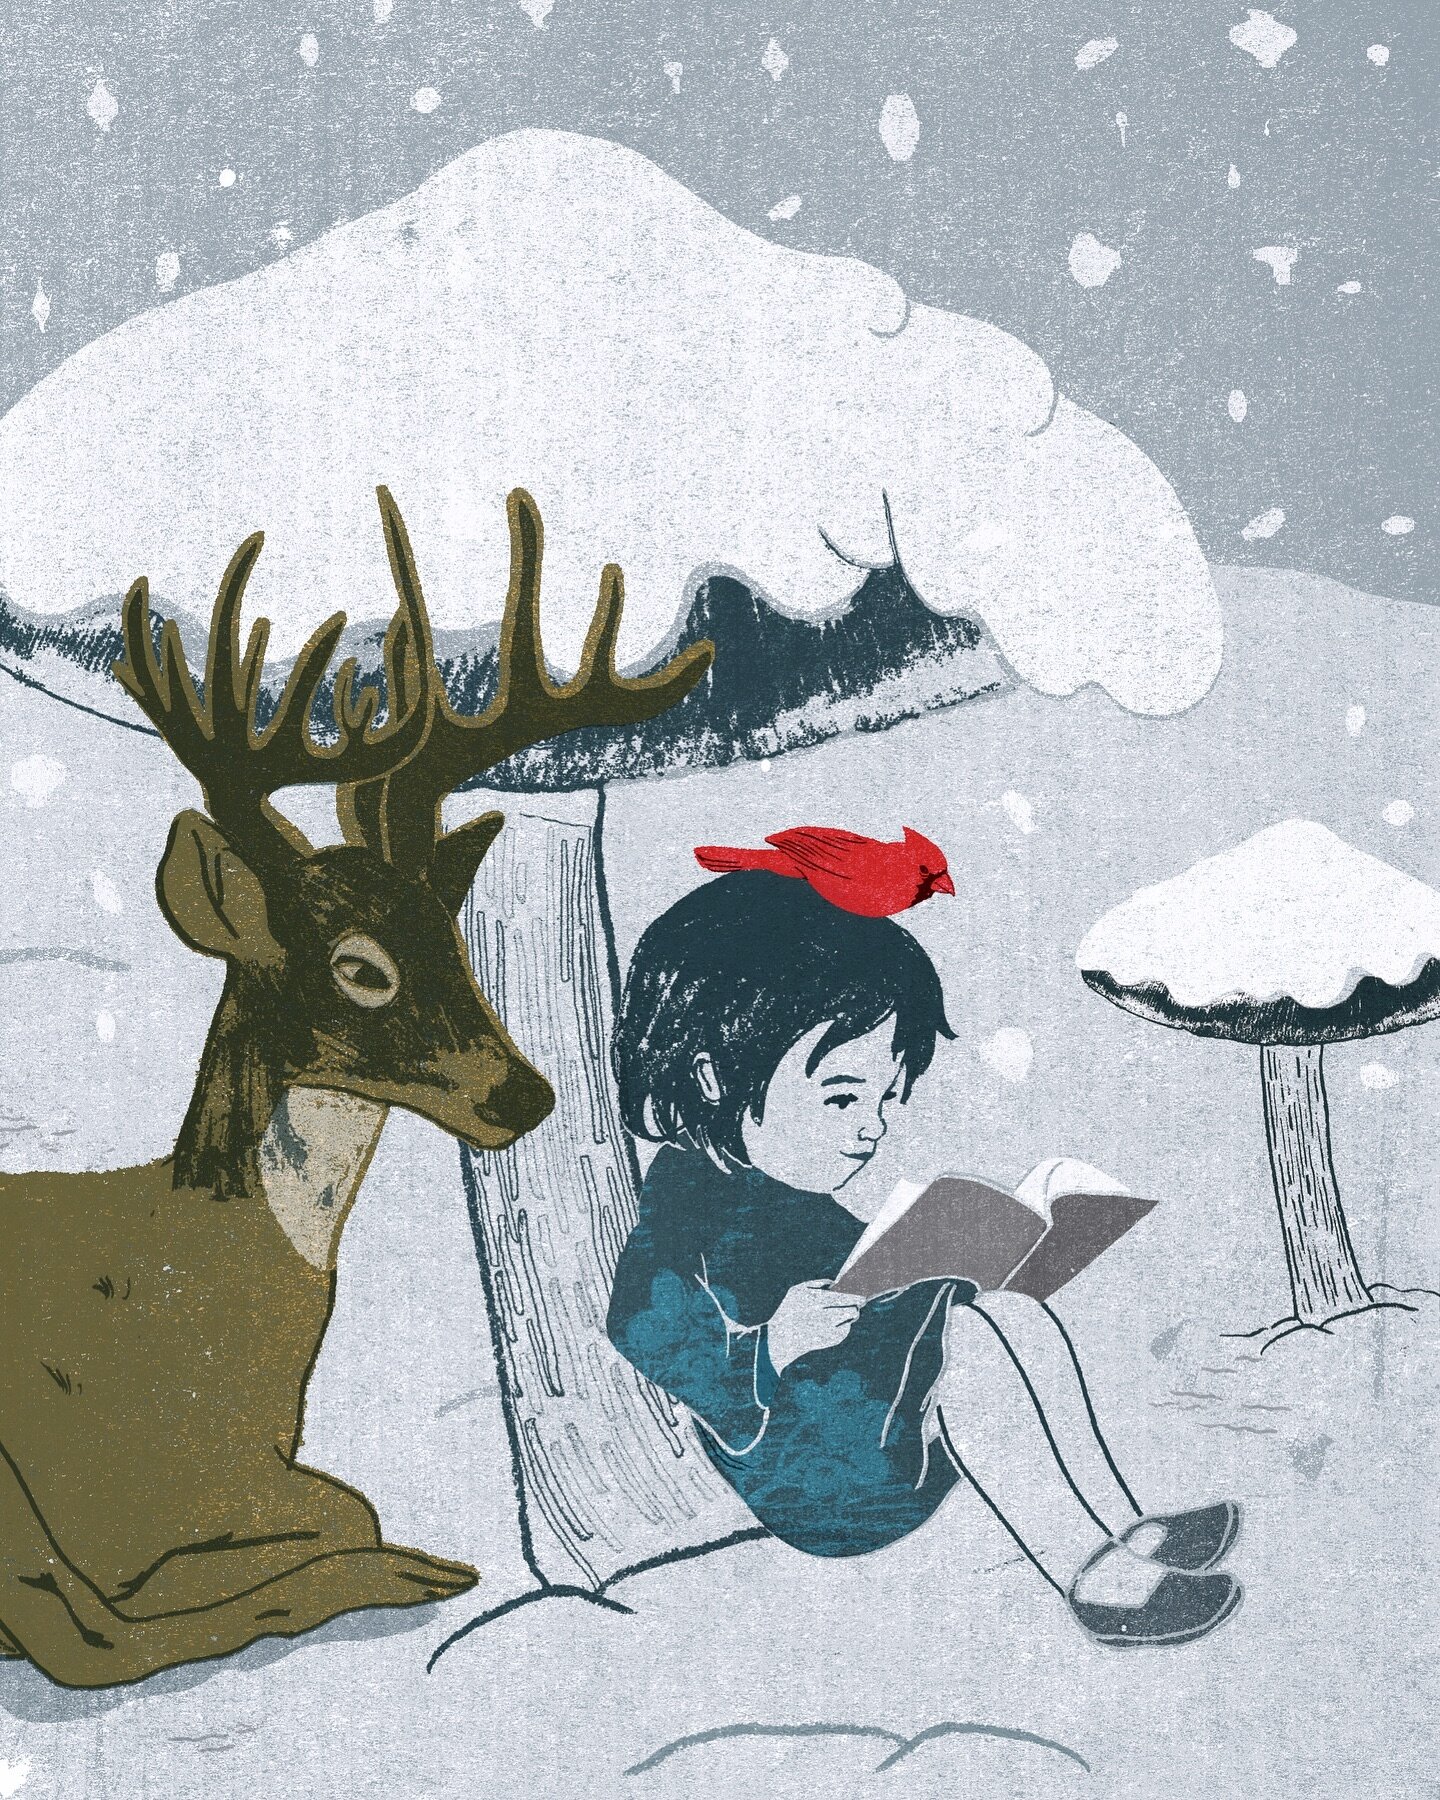 Someday you will be old enough to start reading fairy tales again (2010)

#winter #fairytales #cslewis #illustration #art #pittsburgh #illustrator #davidpohl